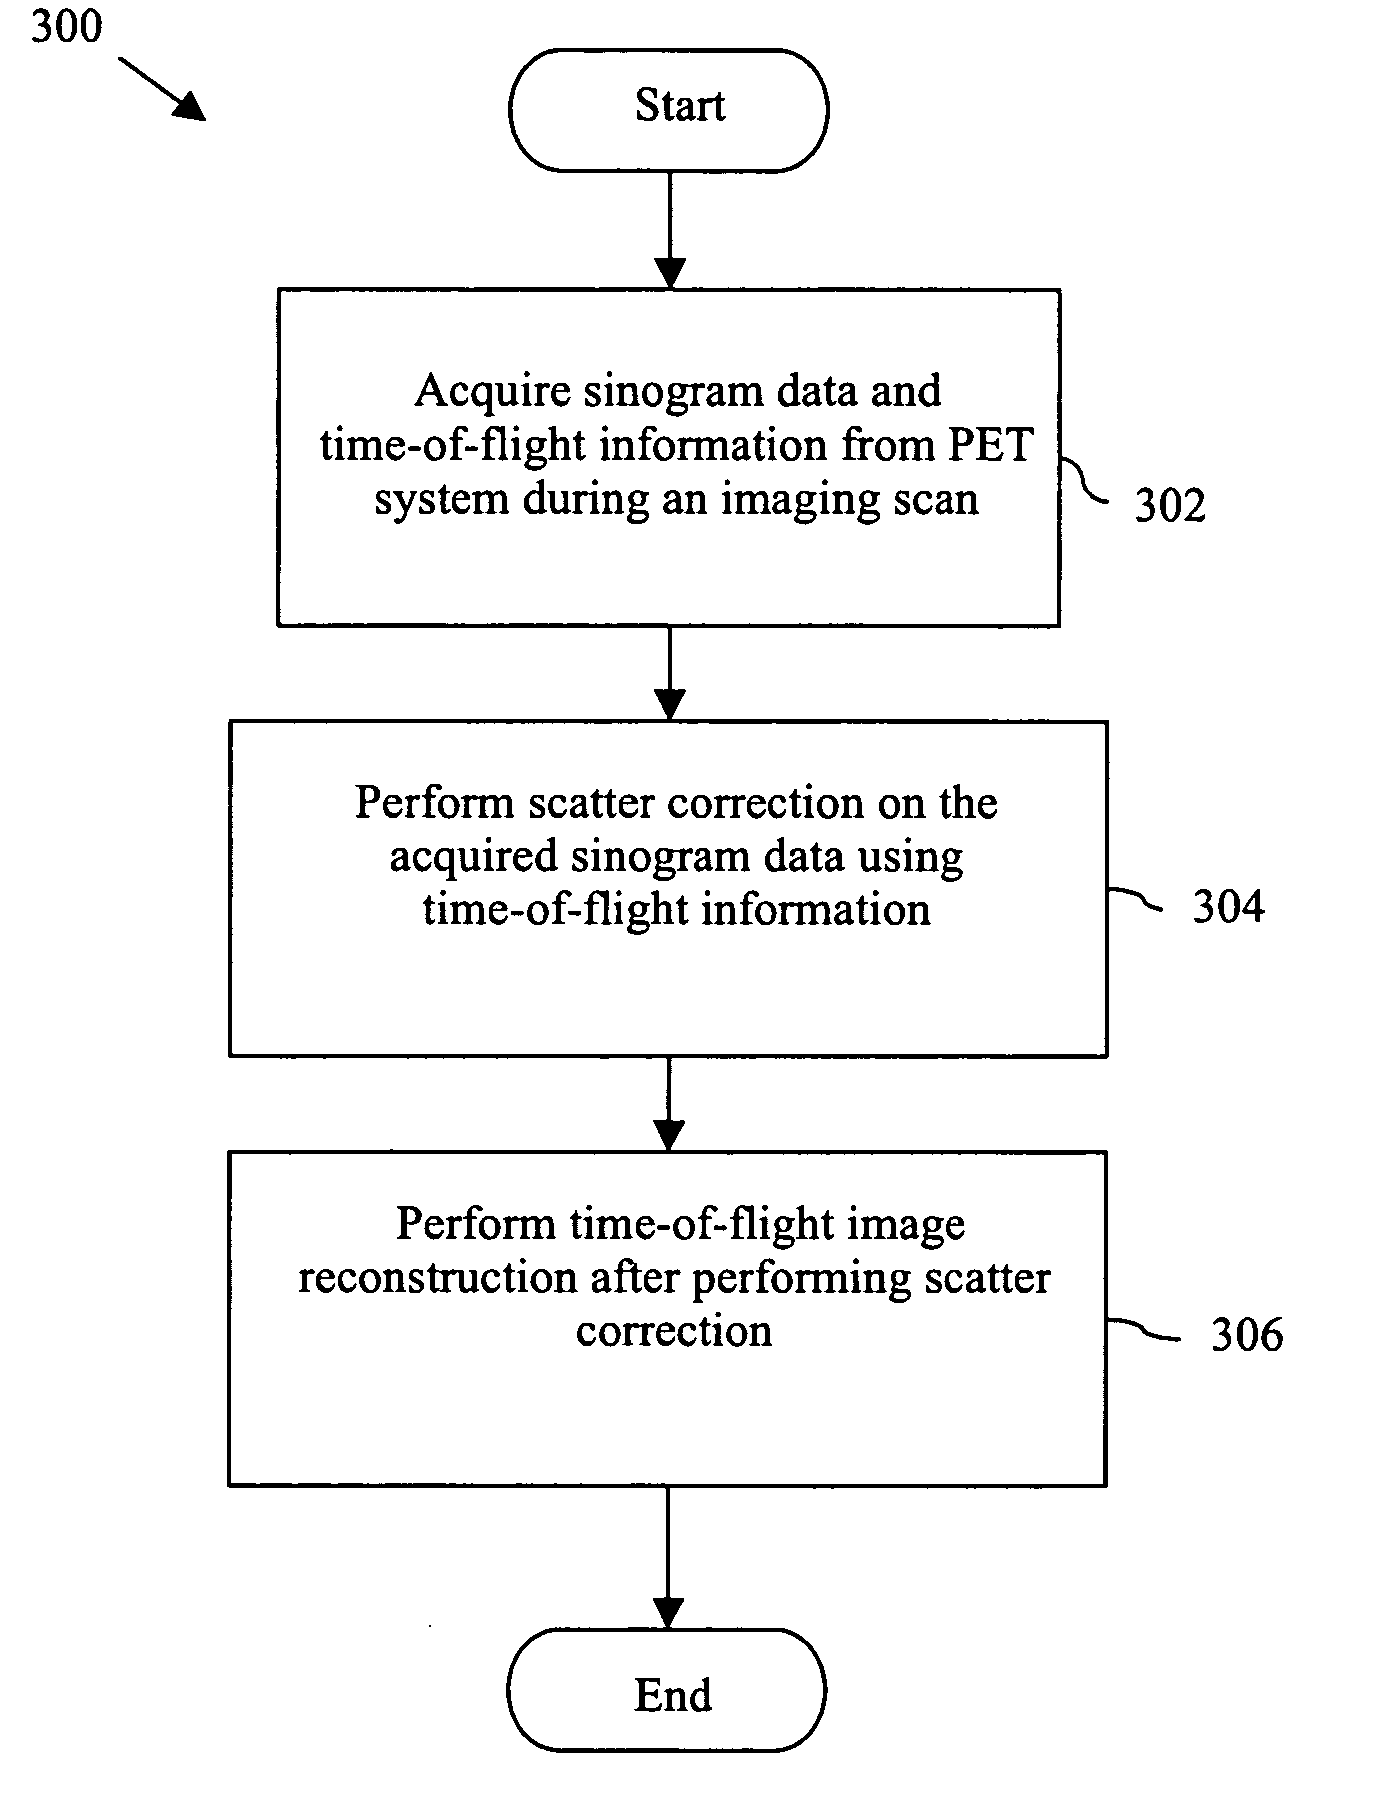 Method and system for scattered coincidence estimation in a time-of-flight positron emission tomography system